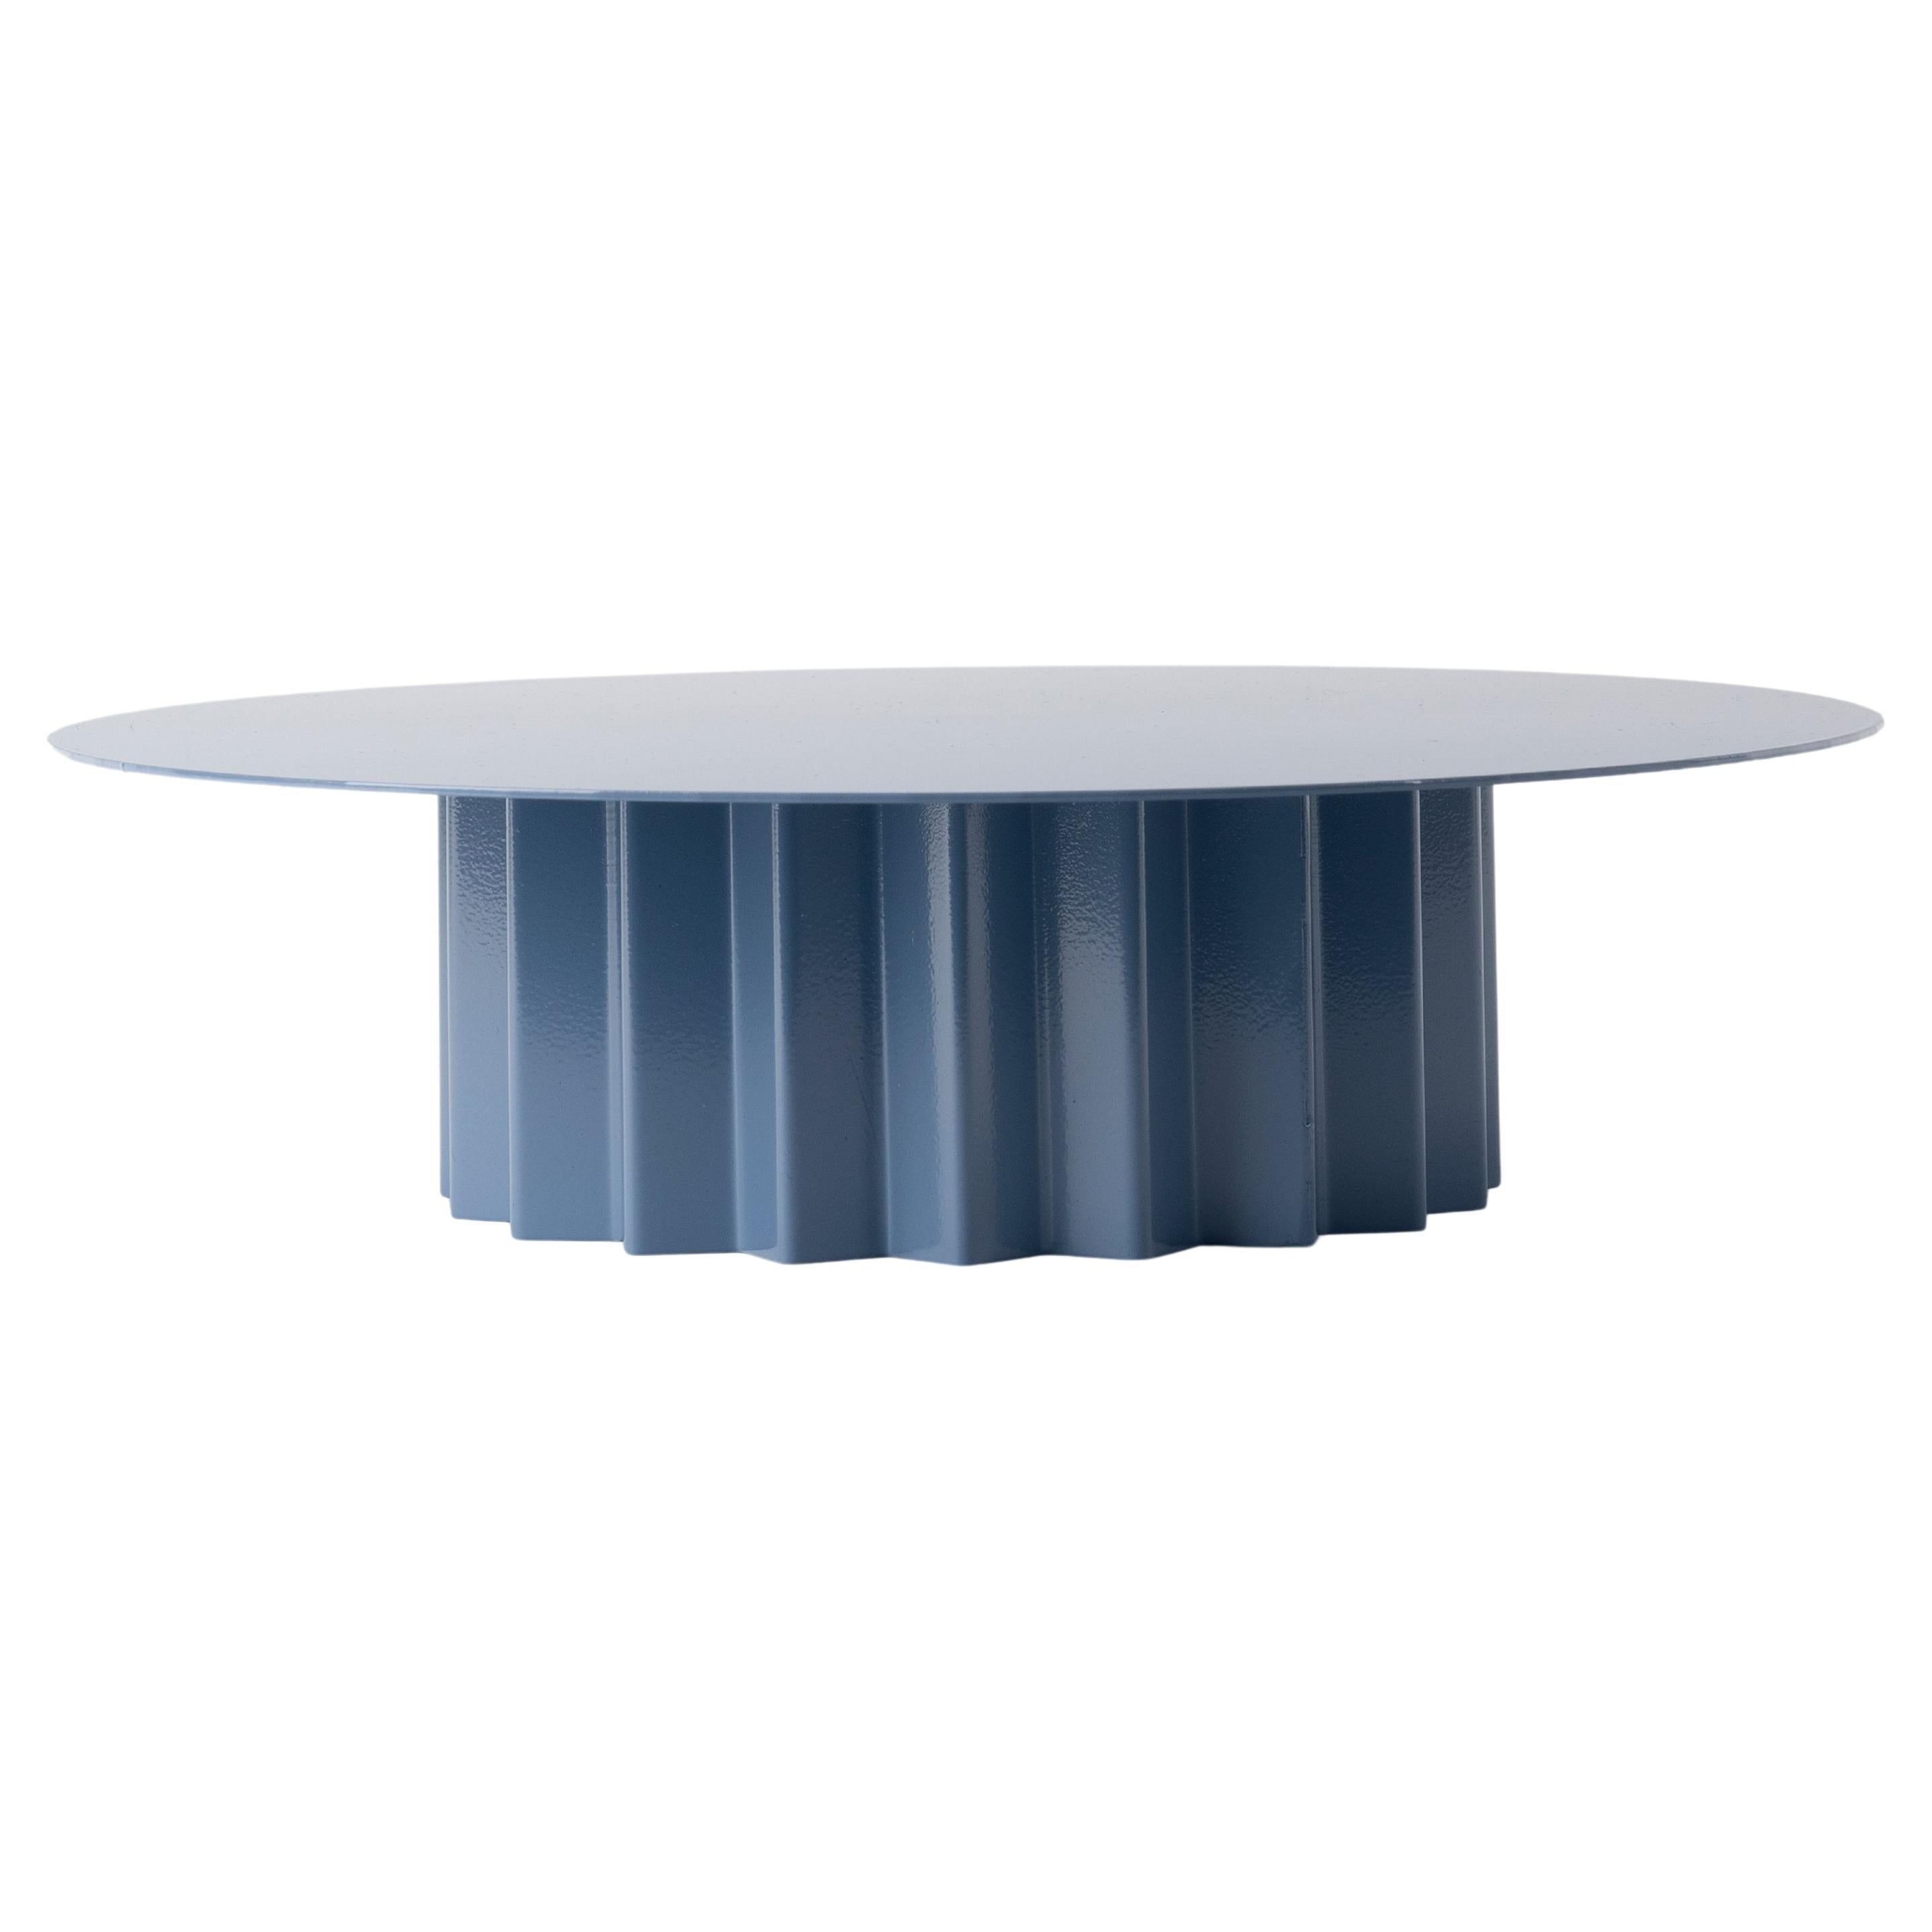 Contemporary Modern, Esnaf Pigeon Blue Round Cake Stand For Sale at 1stDibs